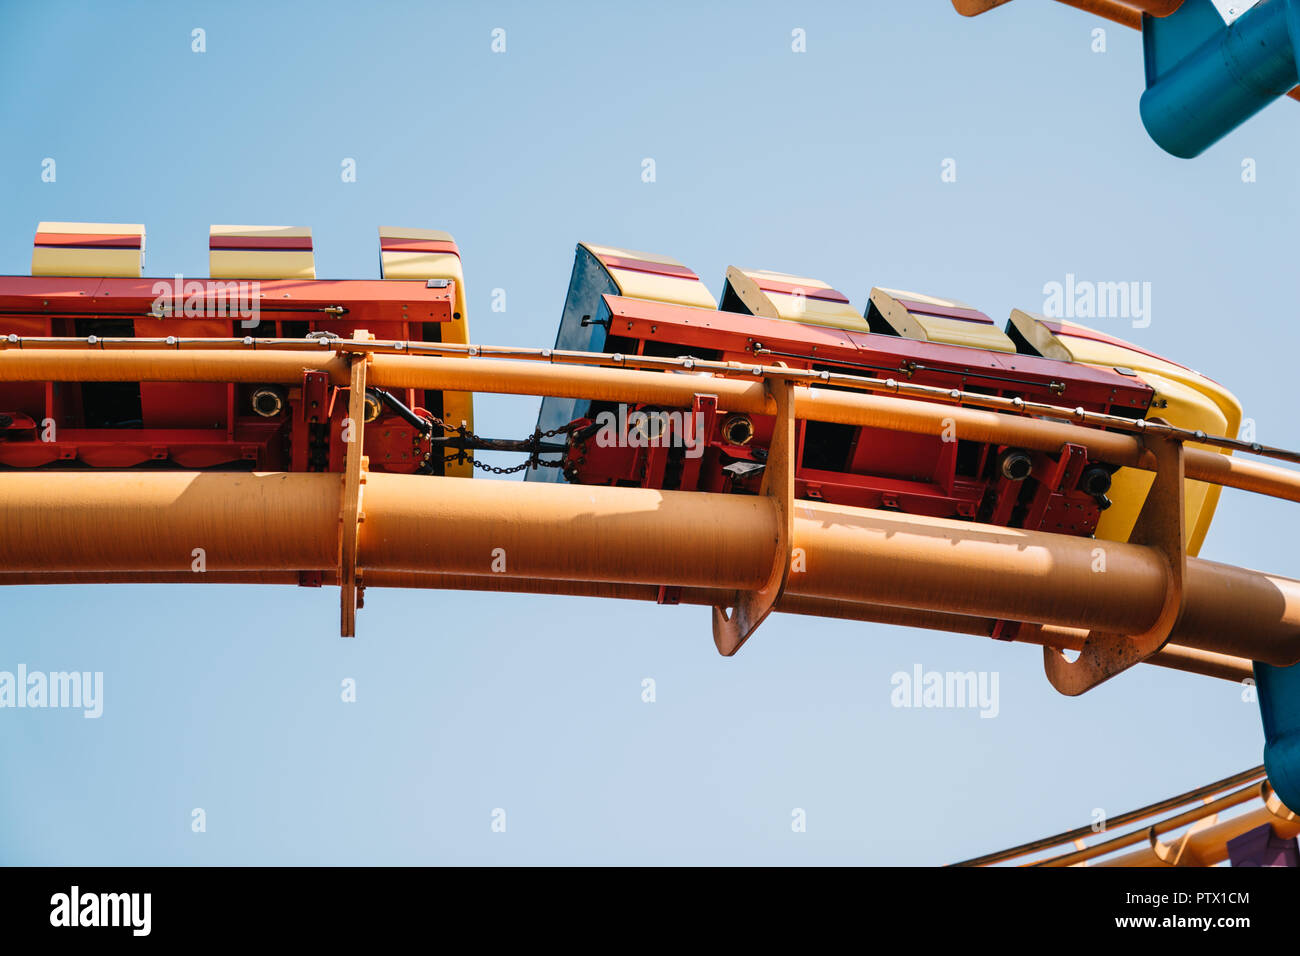 the most popular roller coaster in the amusement park is testing on the rail Stock Photo